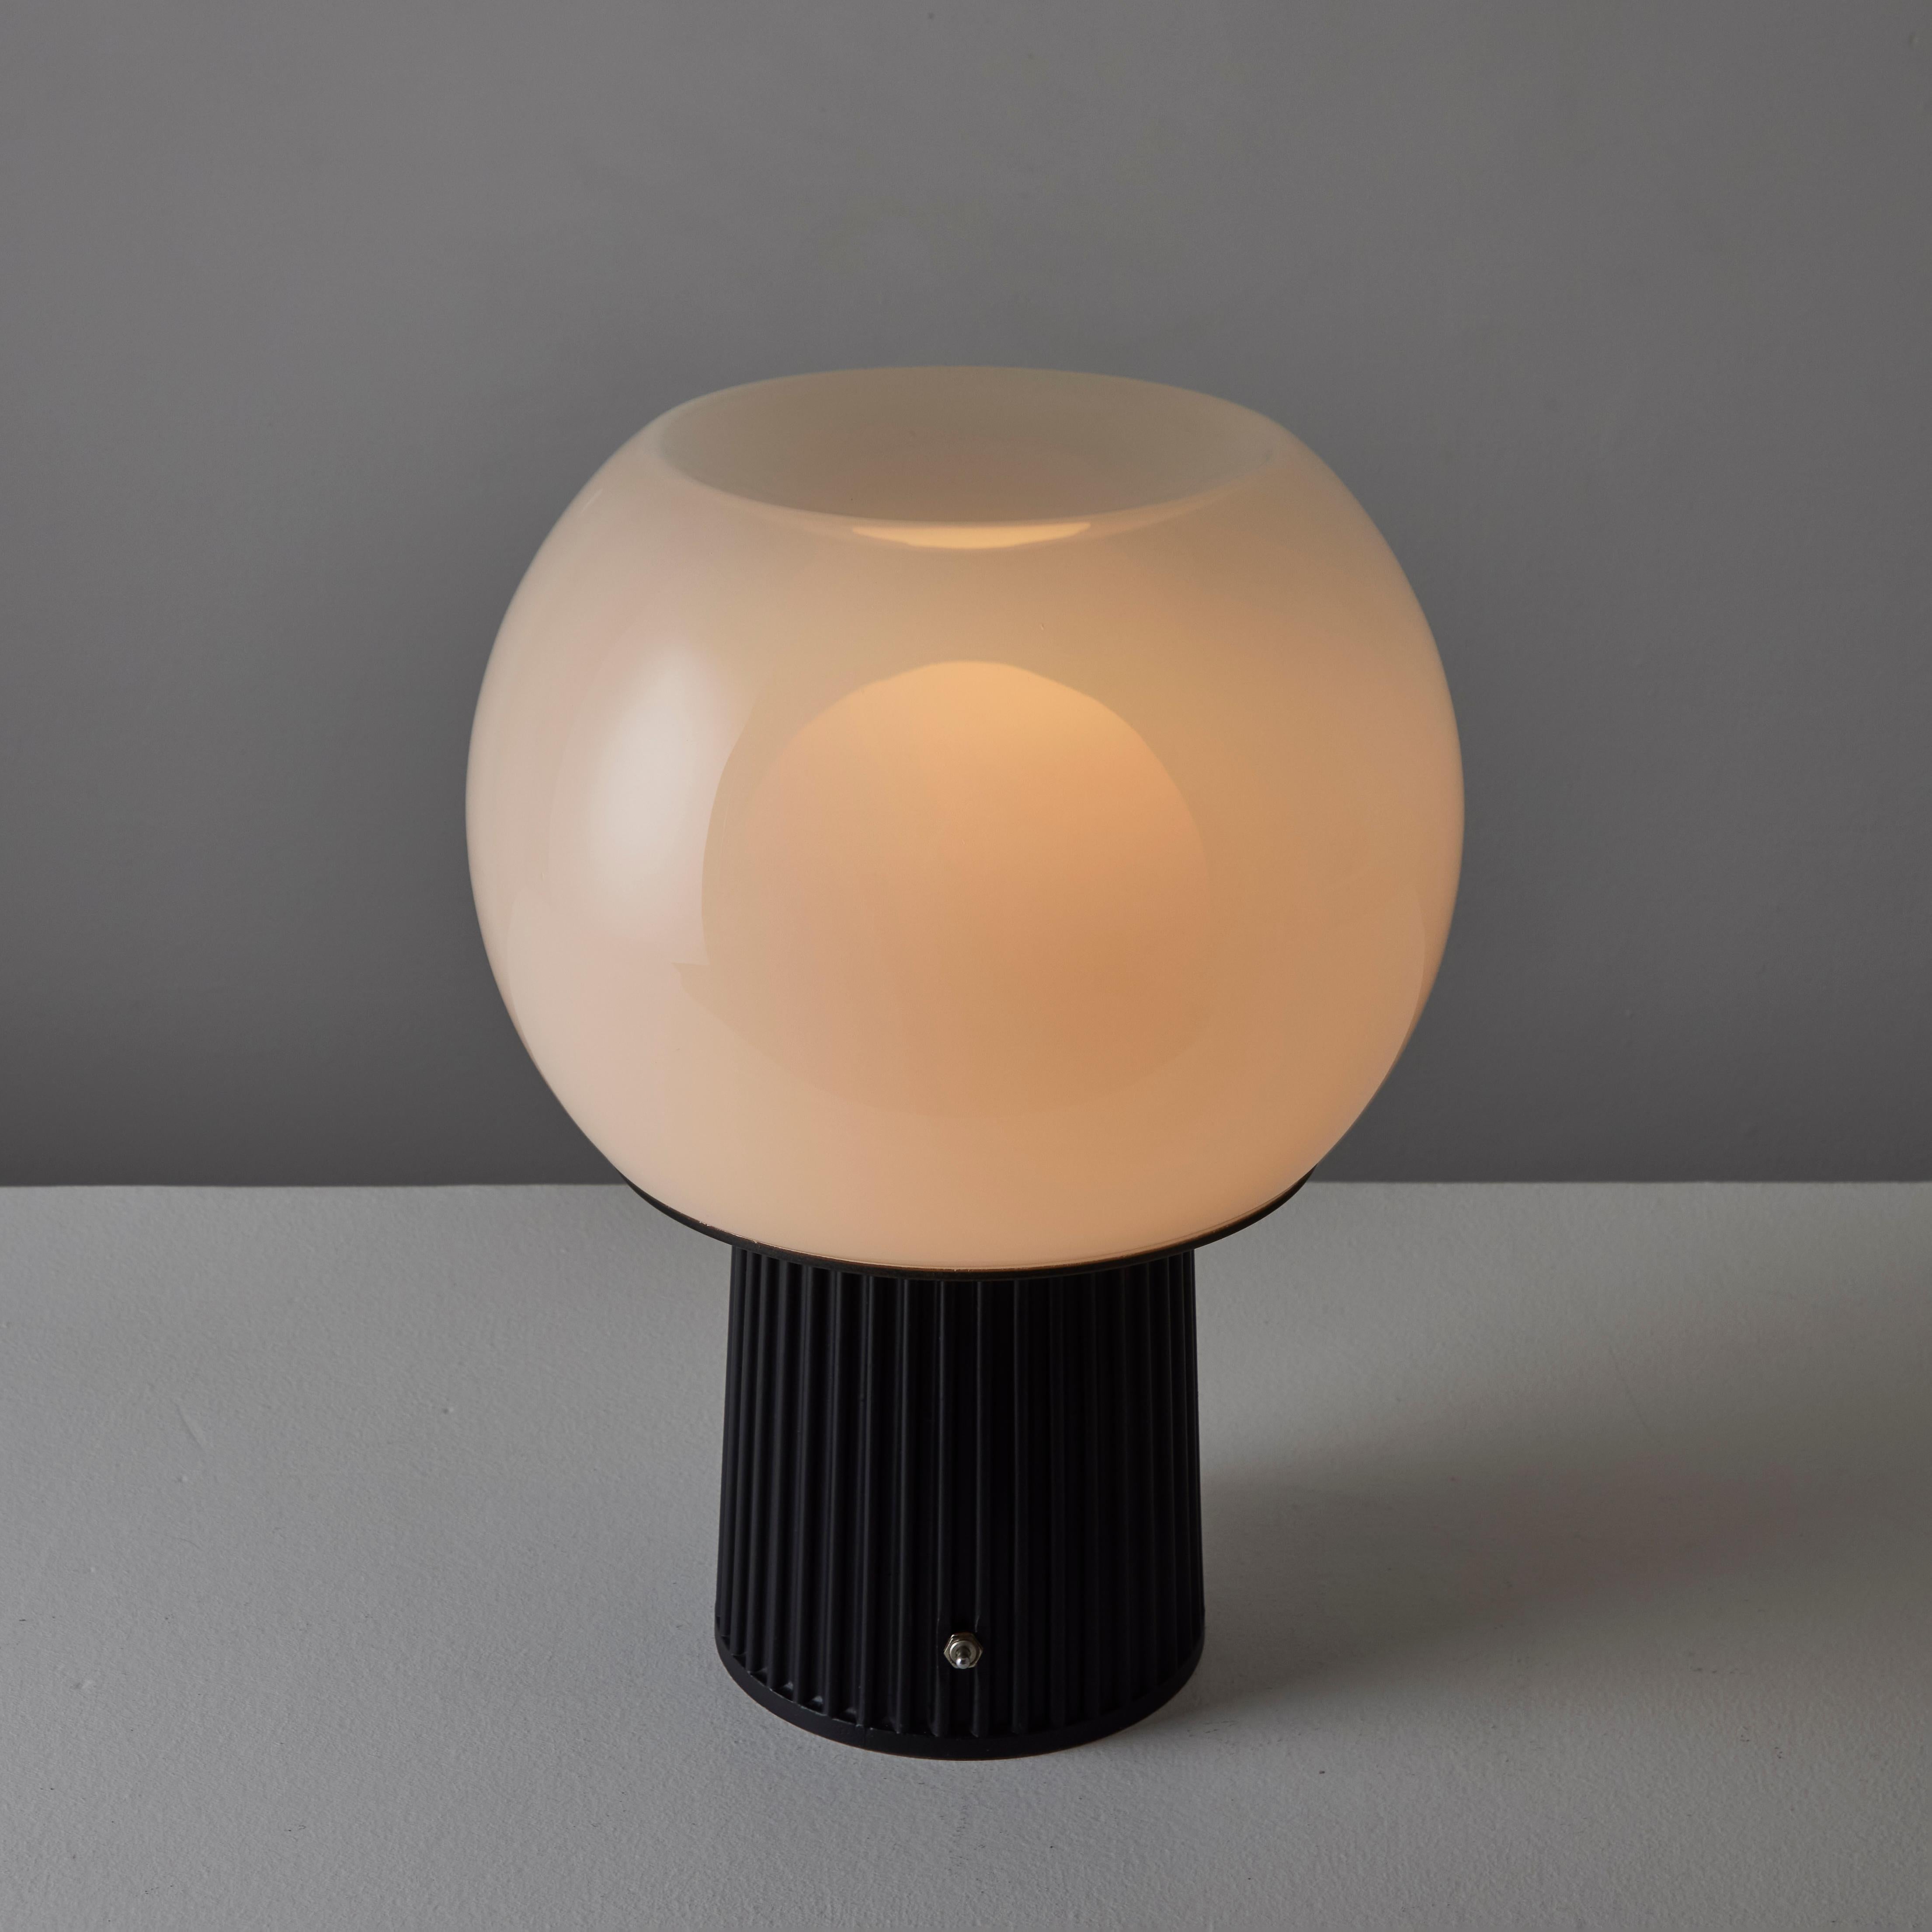 Model D573 Table Lamp by Candle. Designed and manufactured in Italy, circa the 1960s. A black enameled ribbed table base holds a toggle switch at front center. The diffusion comes from an outer concave hand-blown milk glass globe, as well as an